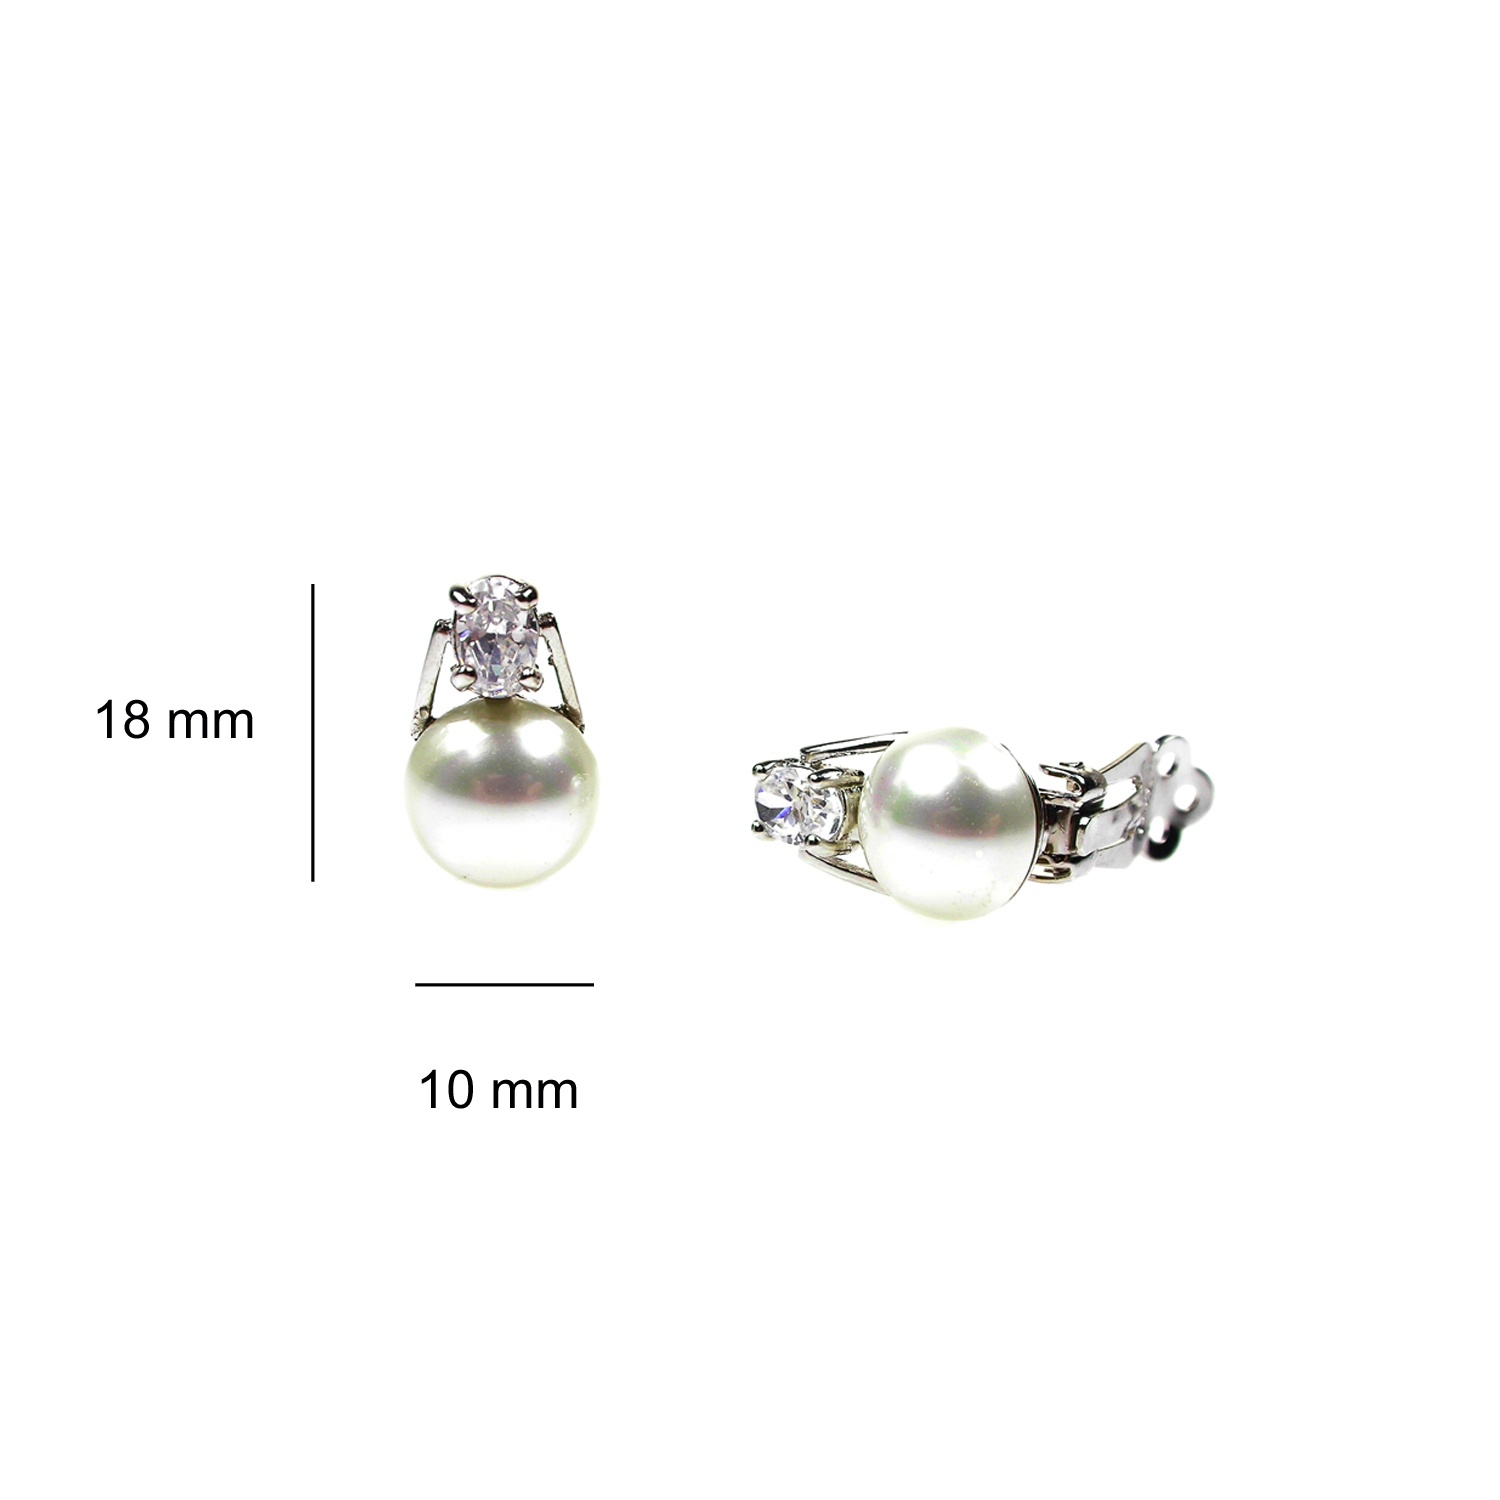 Earrings in Sterling Silver with cabouchon Pearls and zircons 3